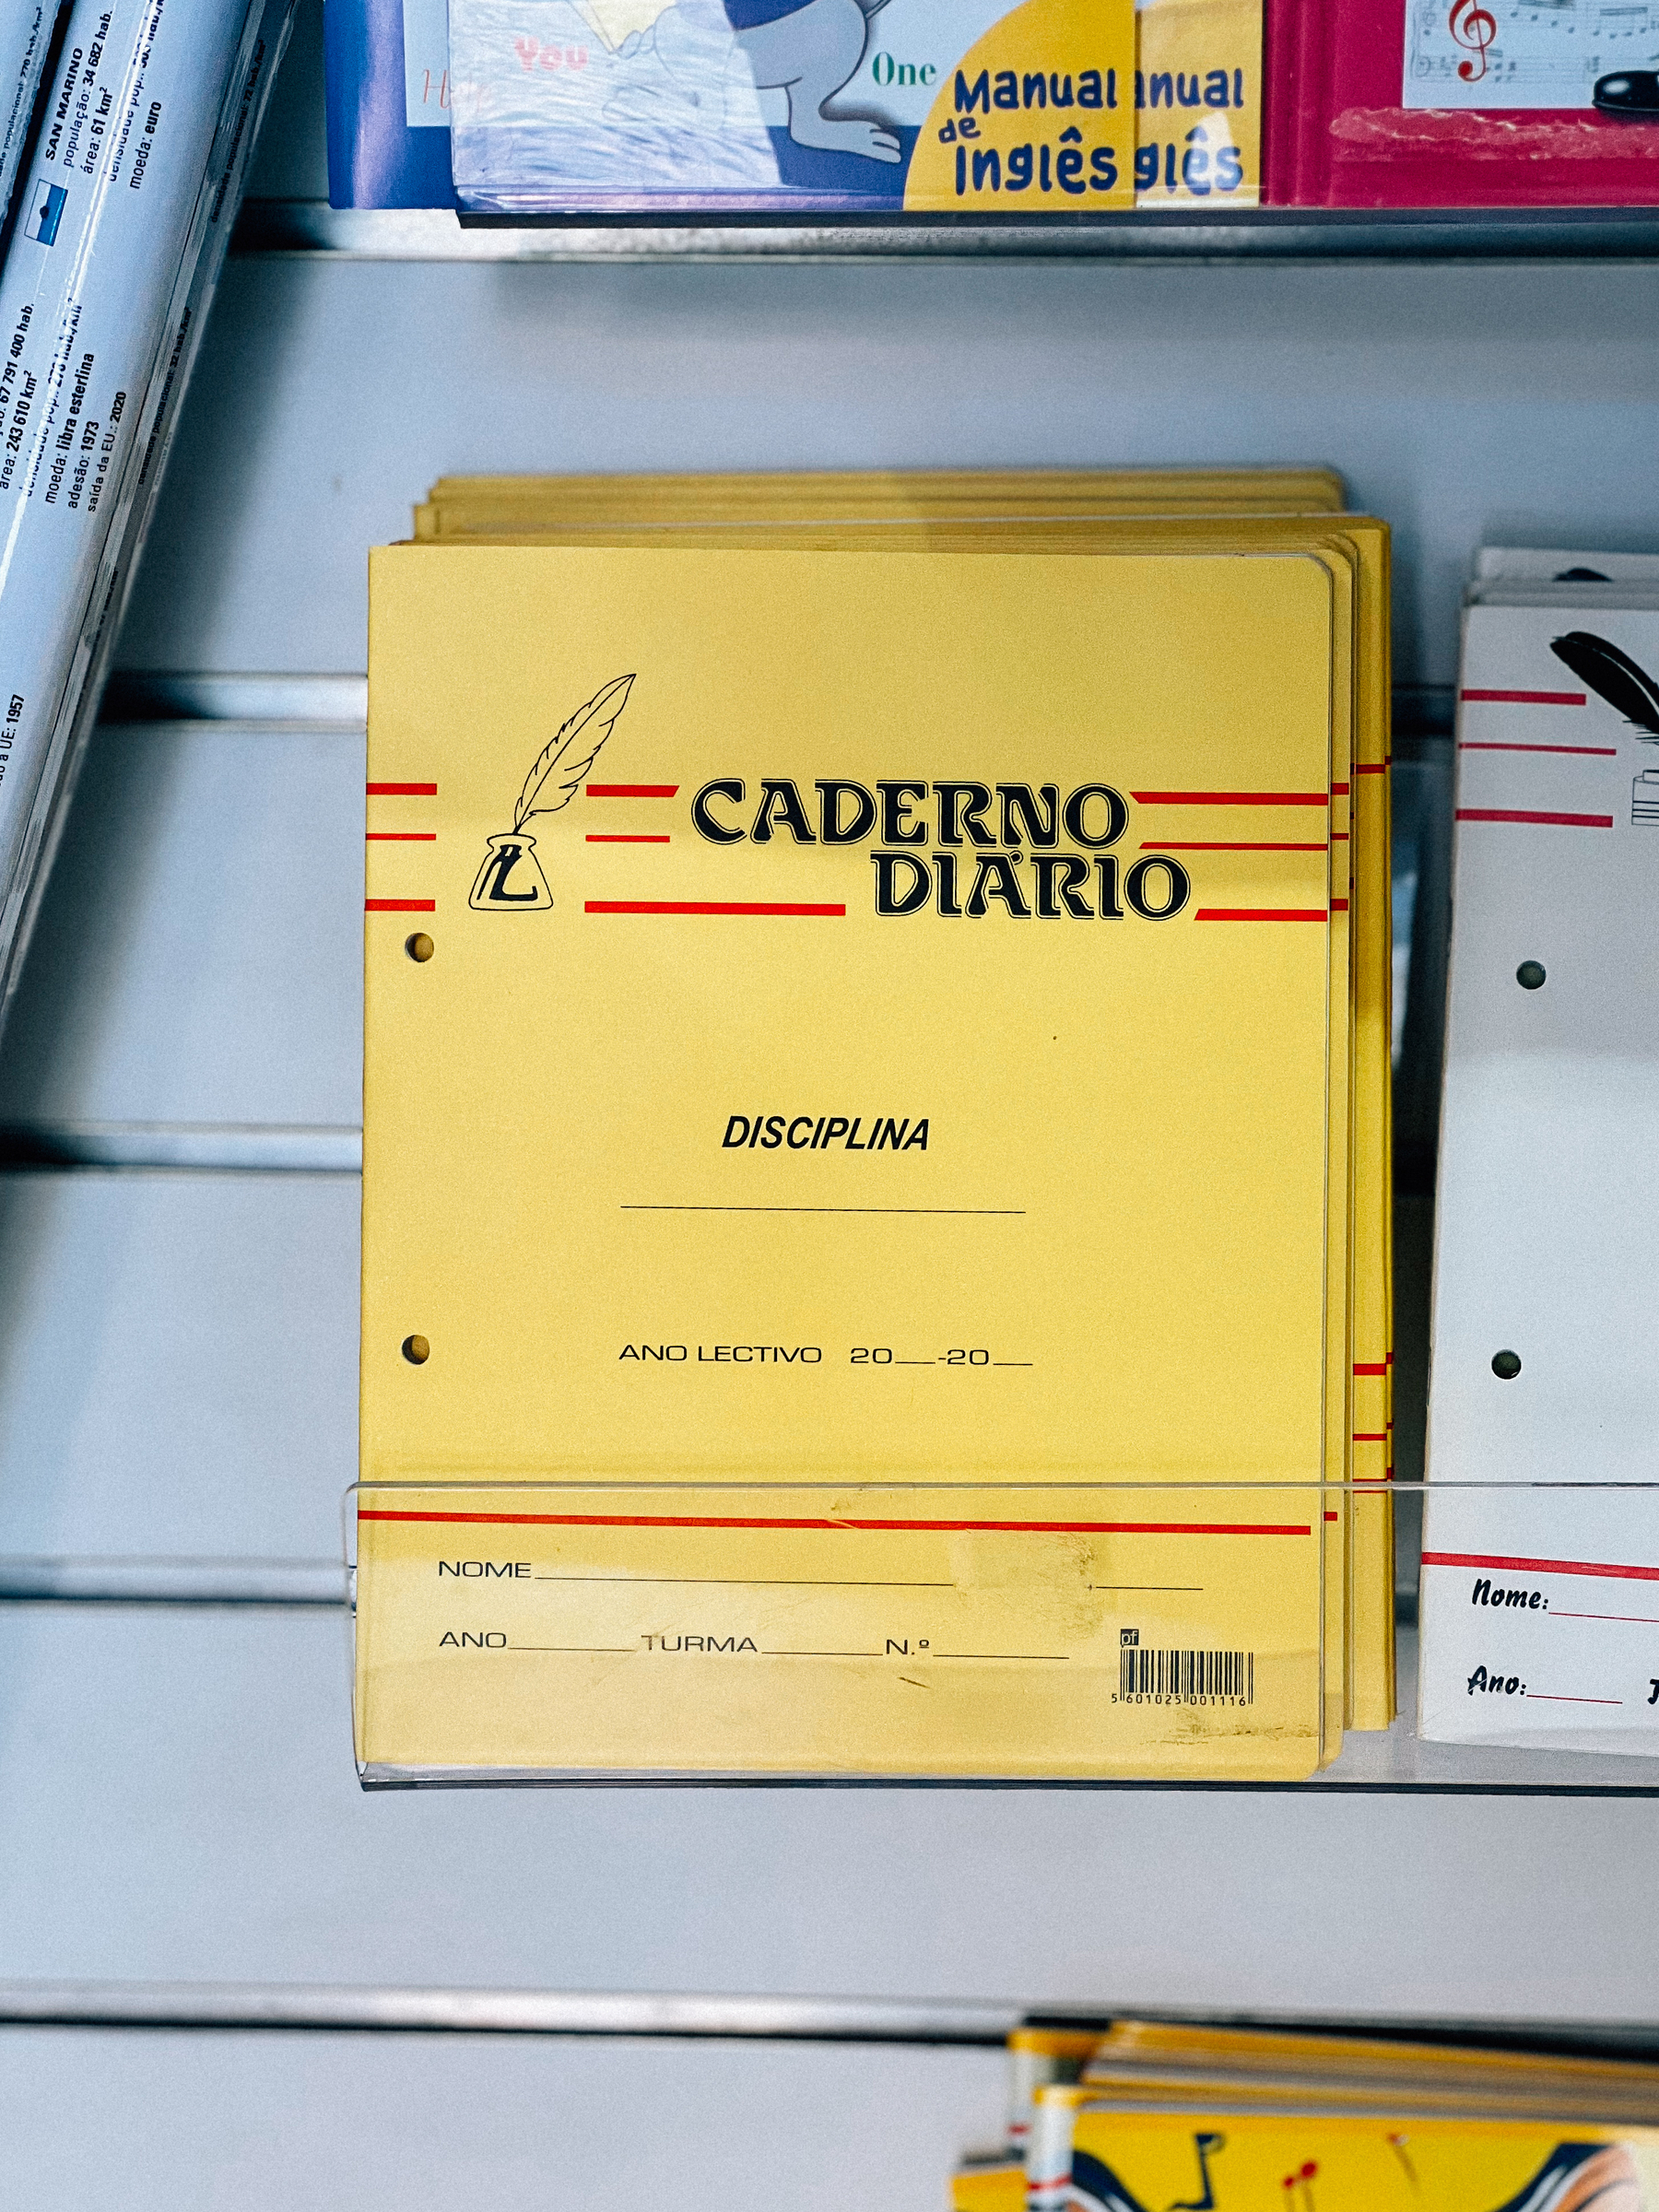 A stack of yellow school notebooks labeled &ldquo;Caderno Diario&rdquo; with space for discipline, school year, name, class, and number on a bookshelf.